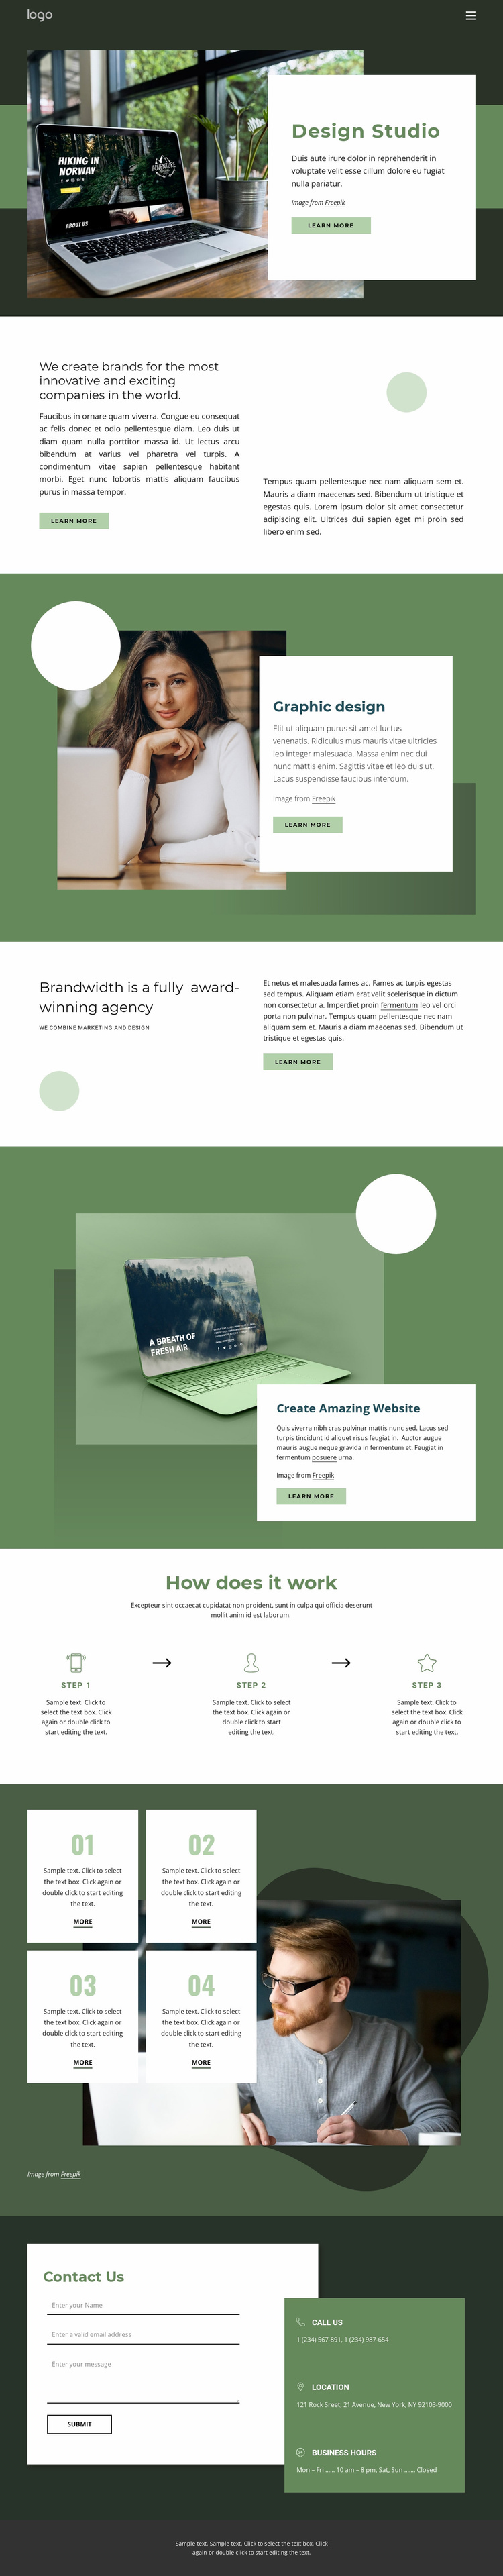 Design inspiration from nature Website Template